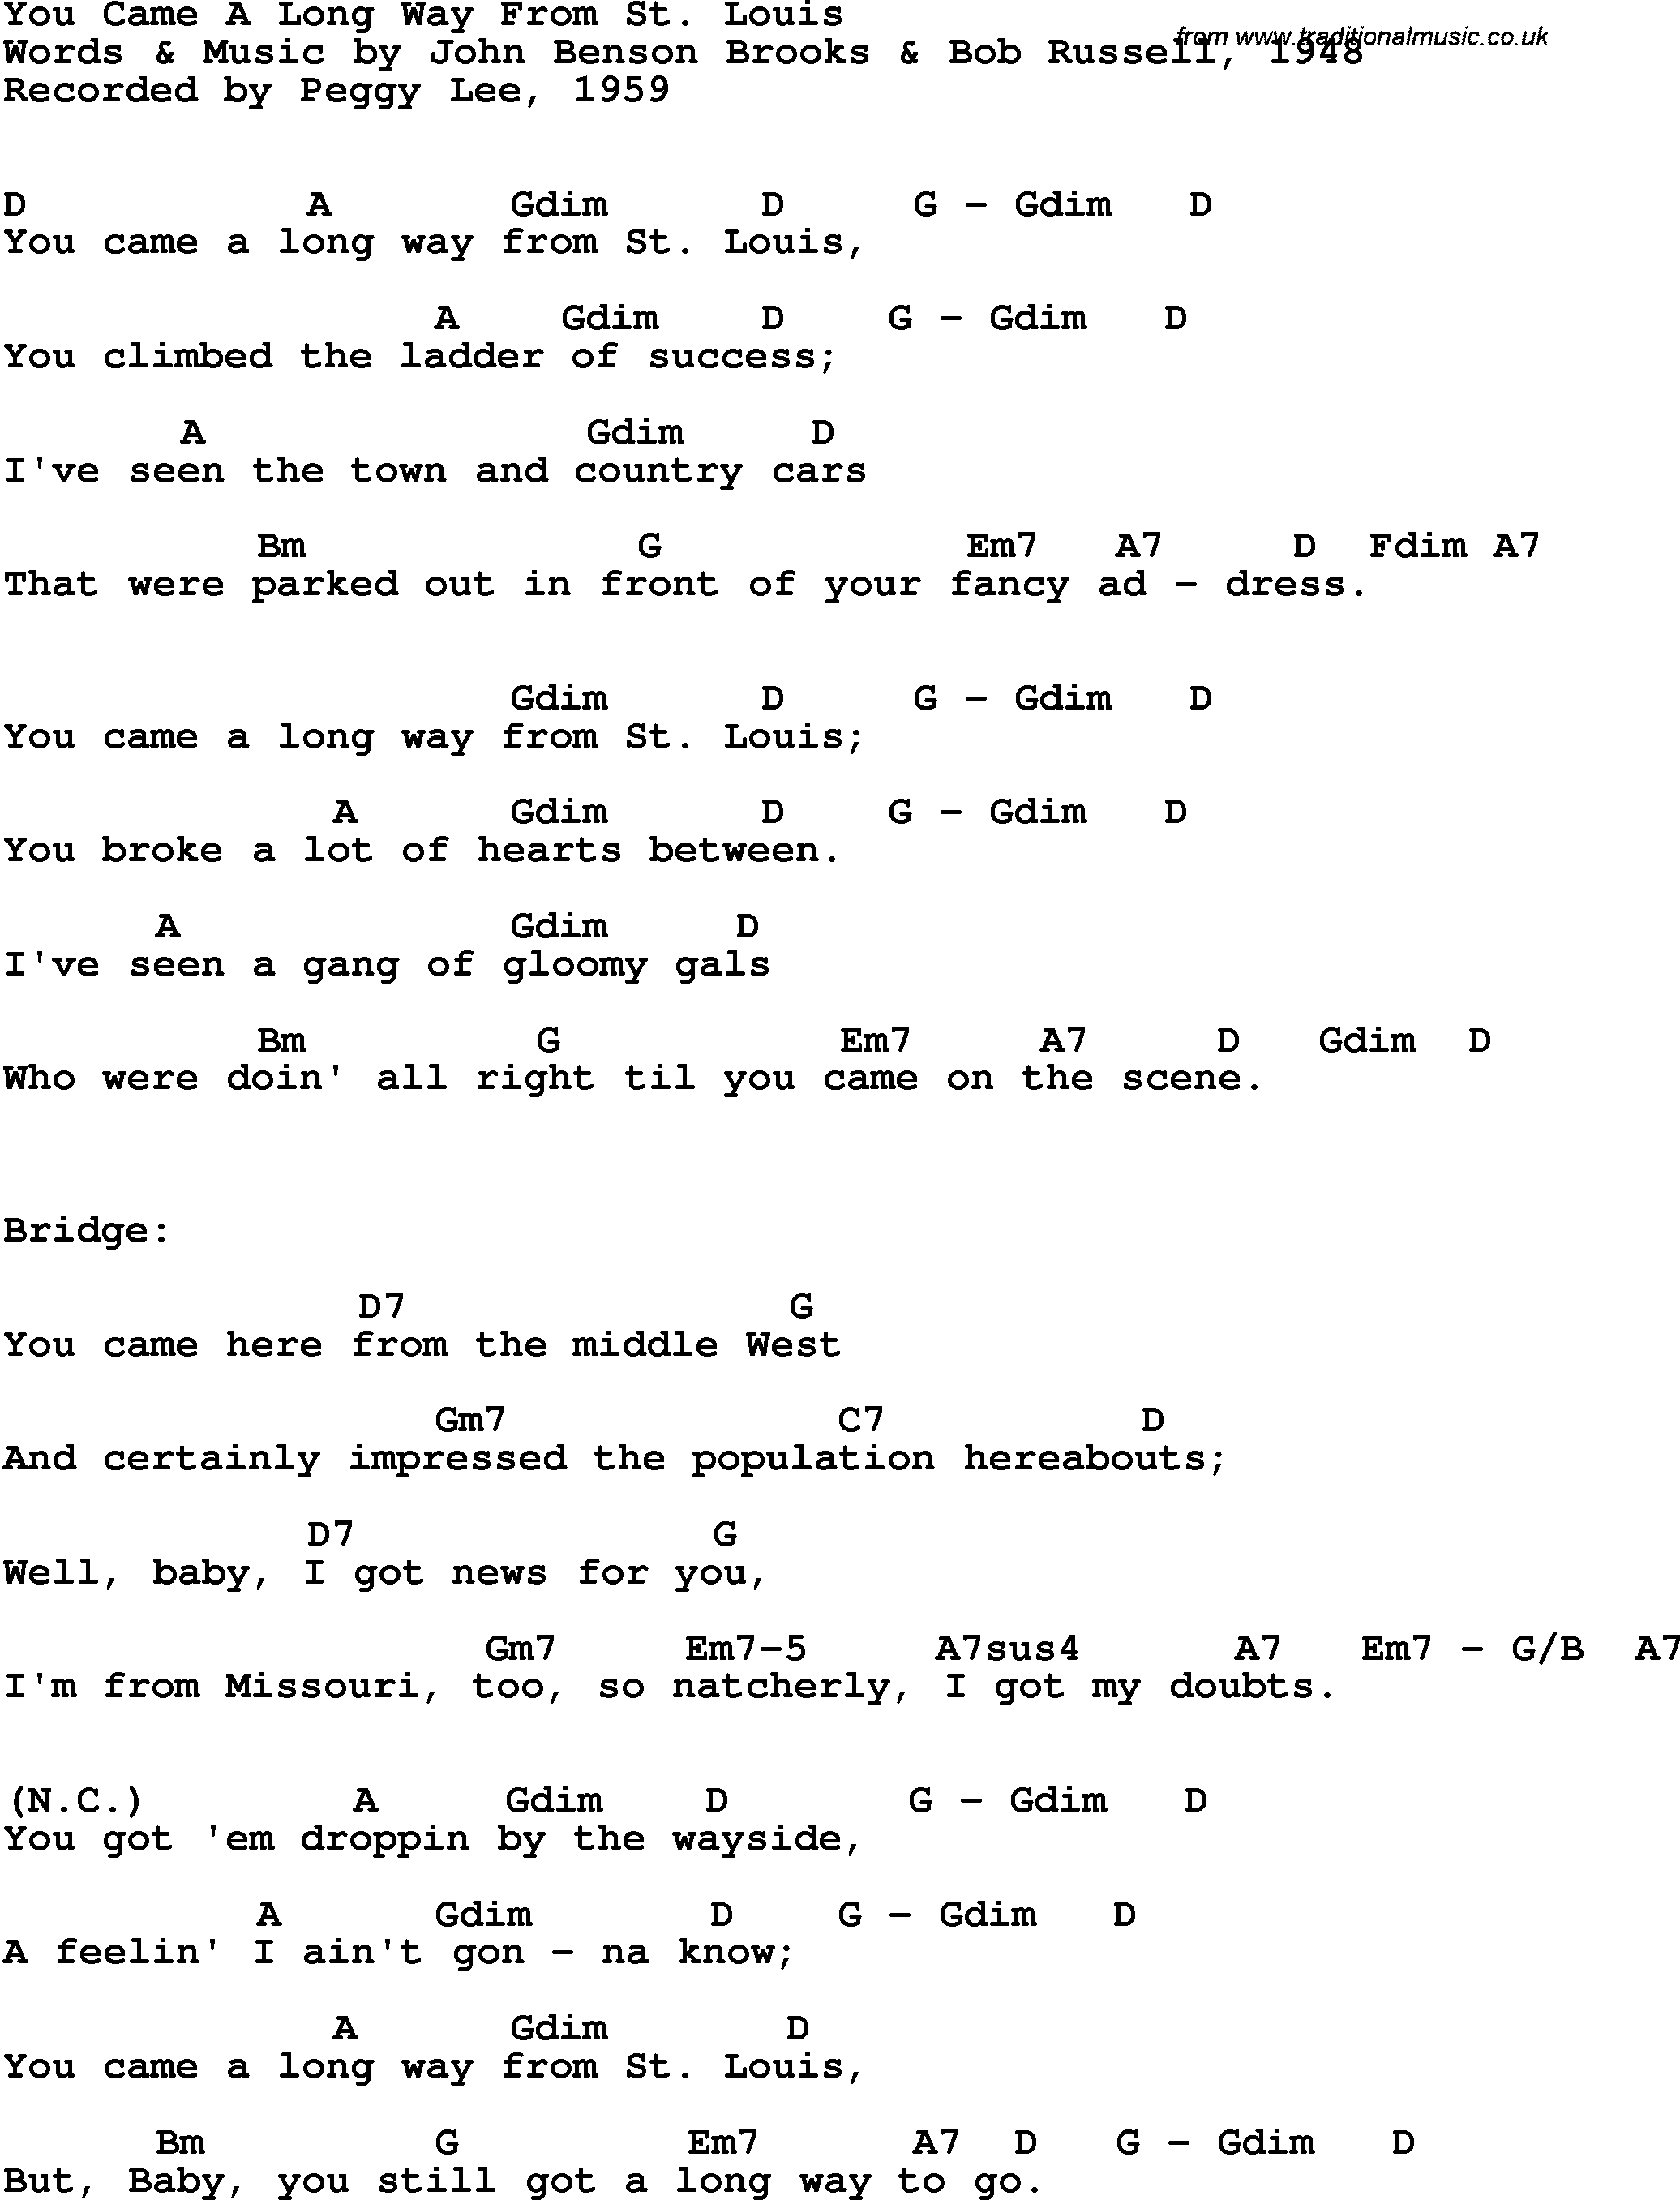 Song Lyrics with guitar chords for You Came A Long Way From St